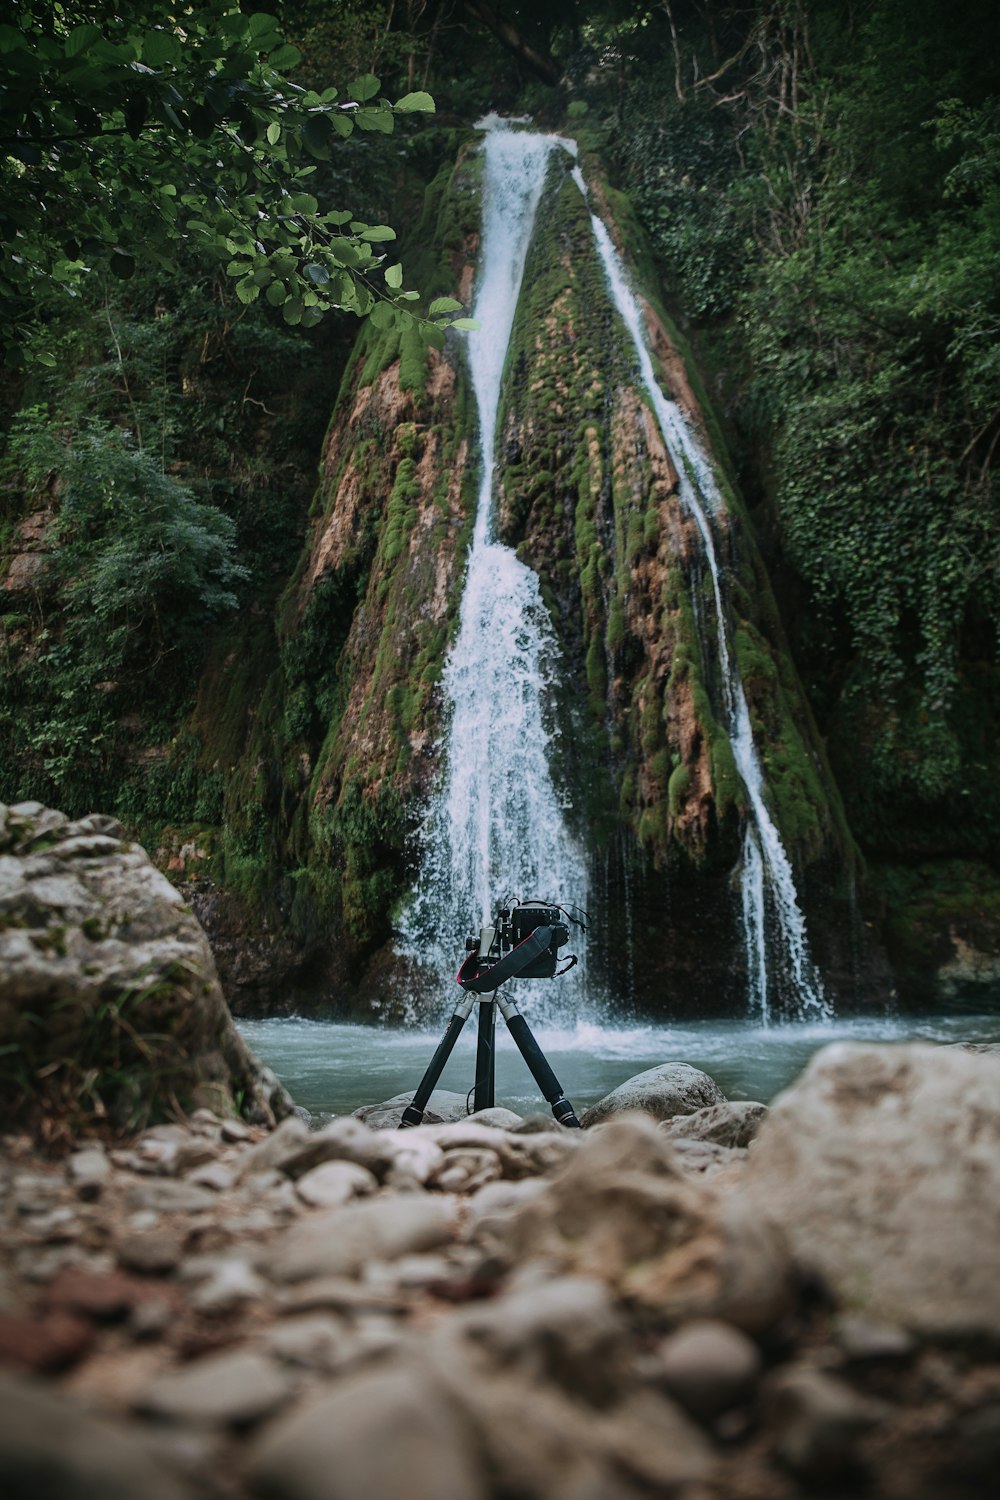 tripod on rocky shore with waterfall background